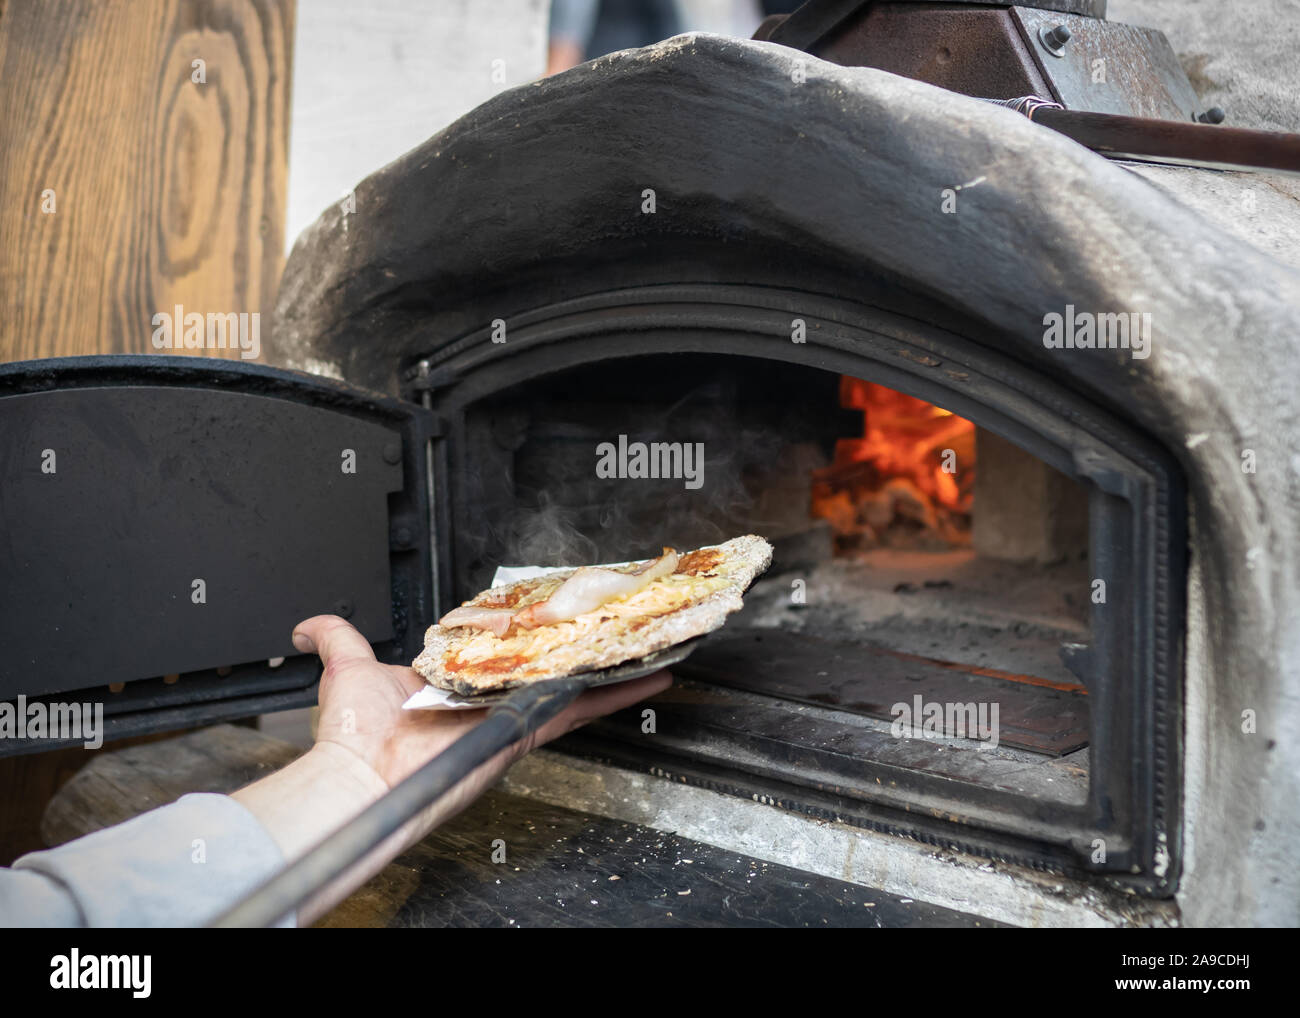 Chef taking out pizza from an oven. Stock Photo